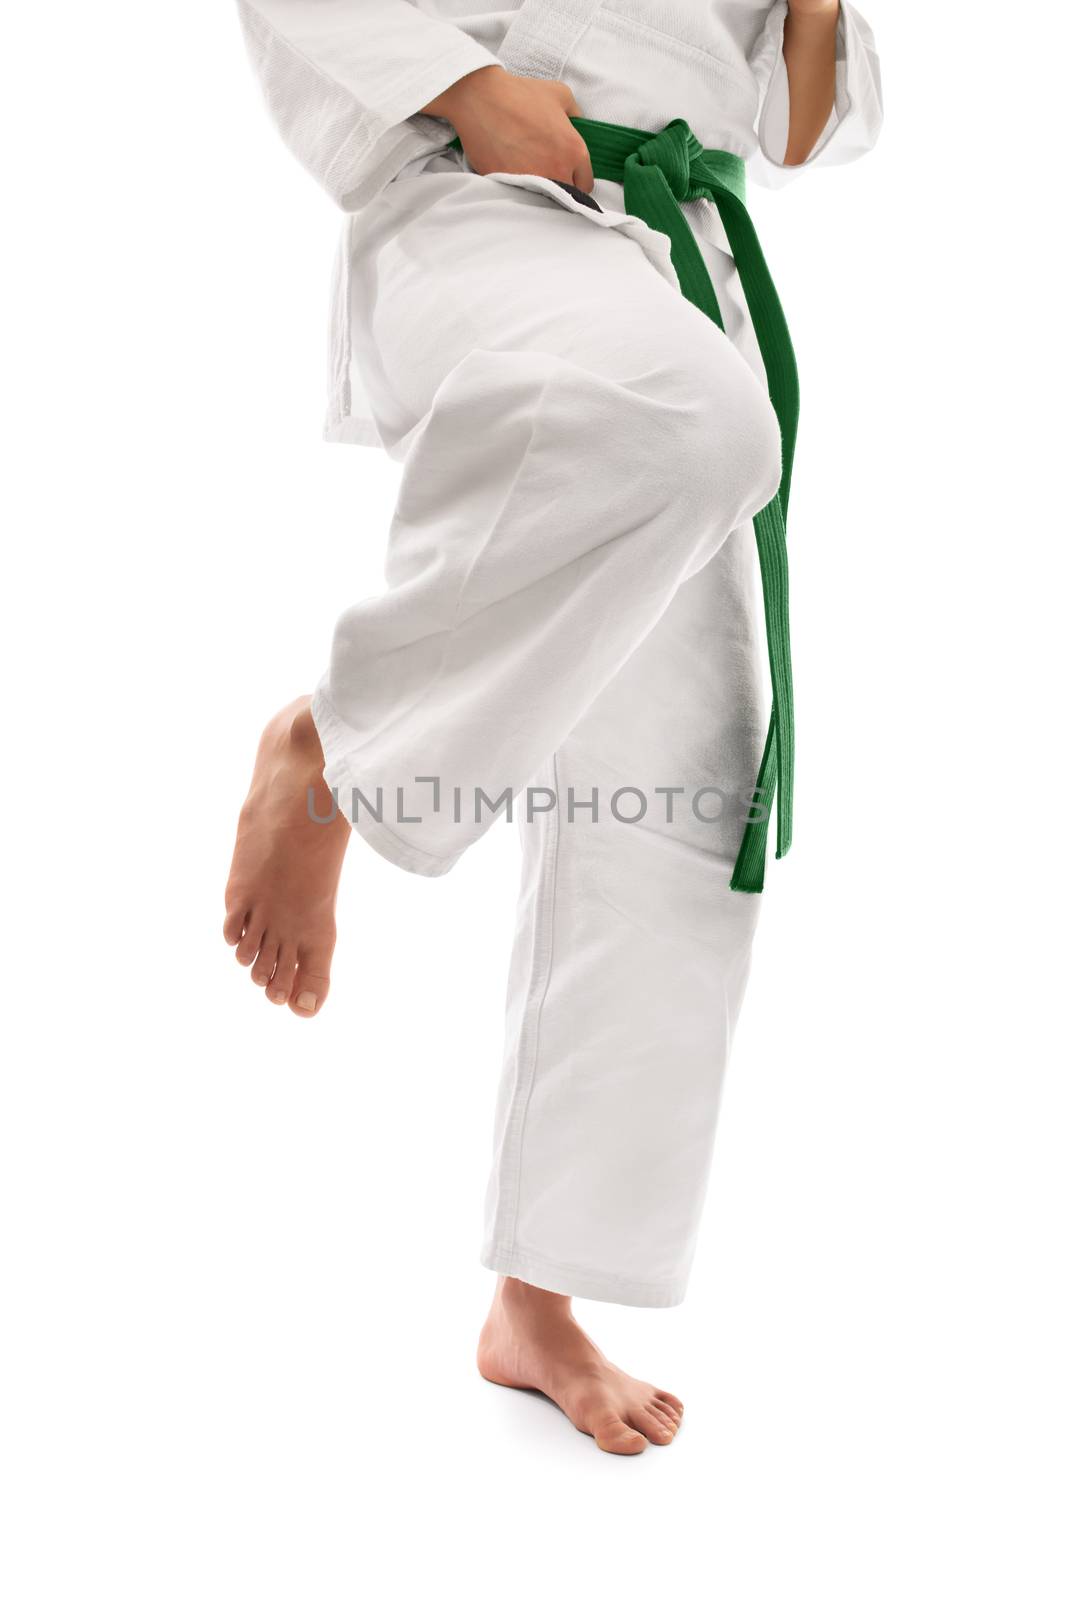 Close up shot of below the waist section of a girl in a kimono with green belt preparing for a knee kick, isolated on white background.